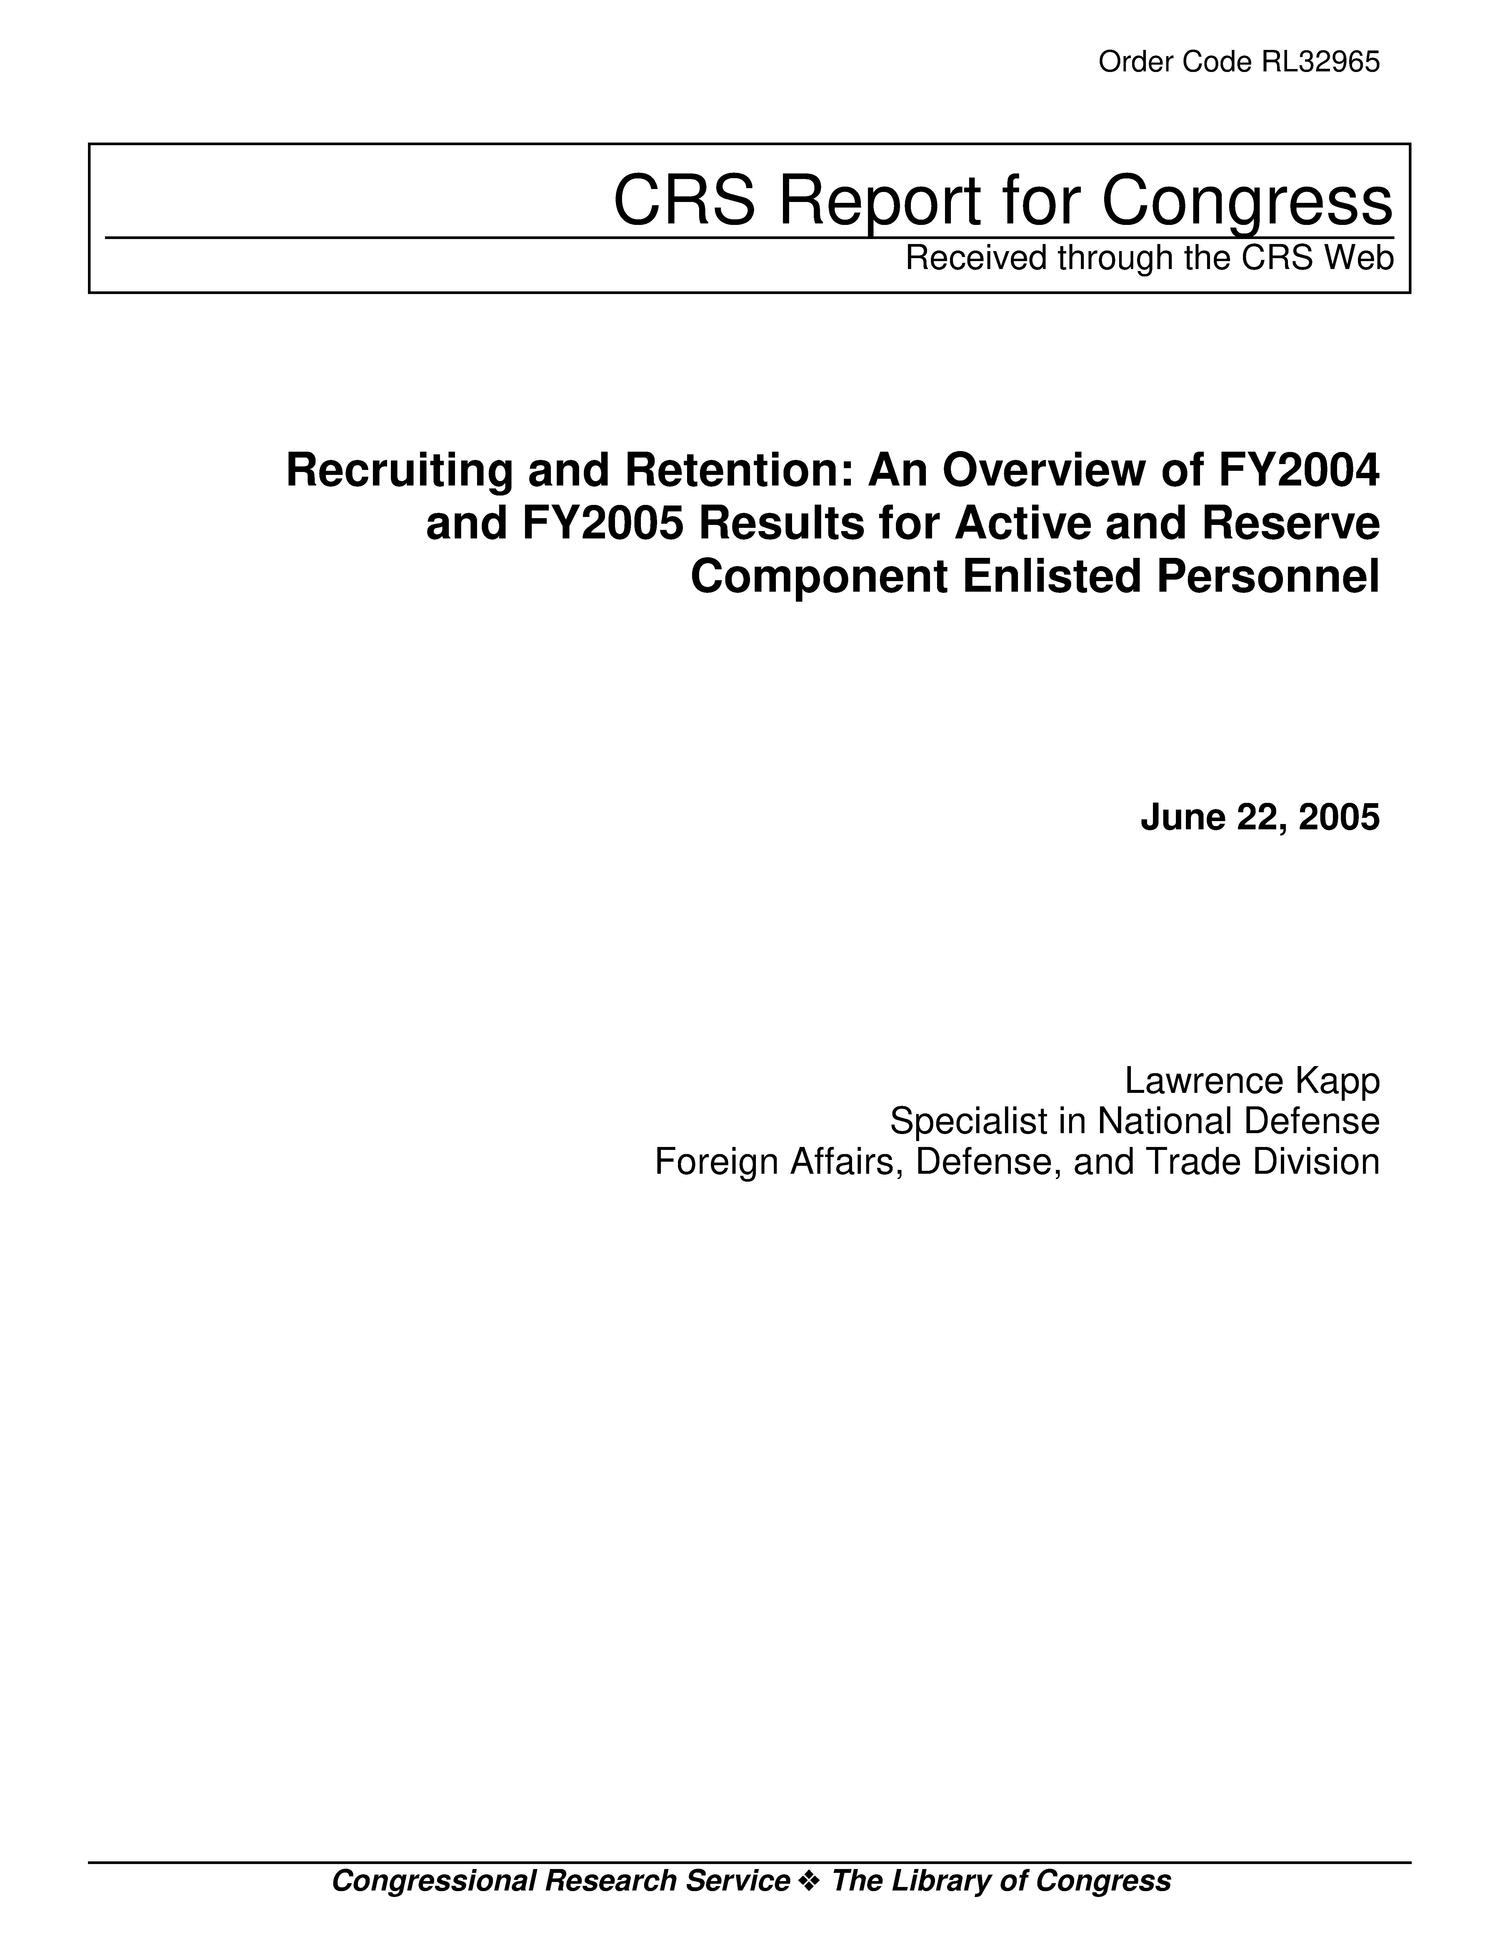 Recruiting and Retention: An Overview of FY2004 and FY2005 Results for Active and Reserve Component Enlisted Personnel
                                                
                                                    [Sequence #]: 1 of 16
                                                